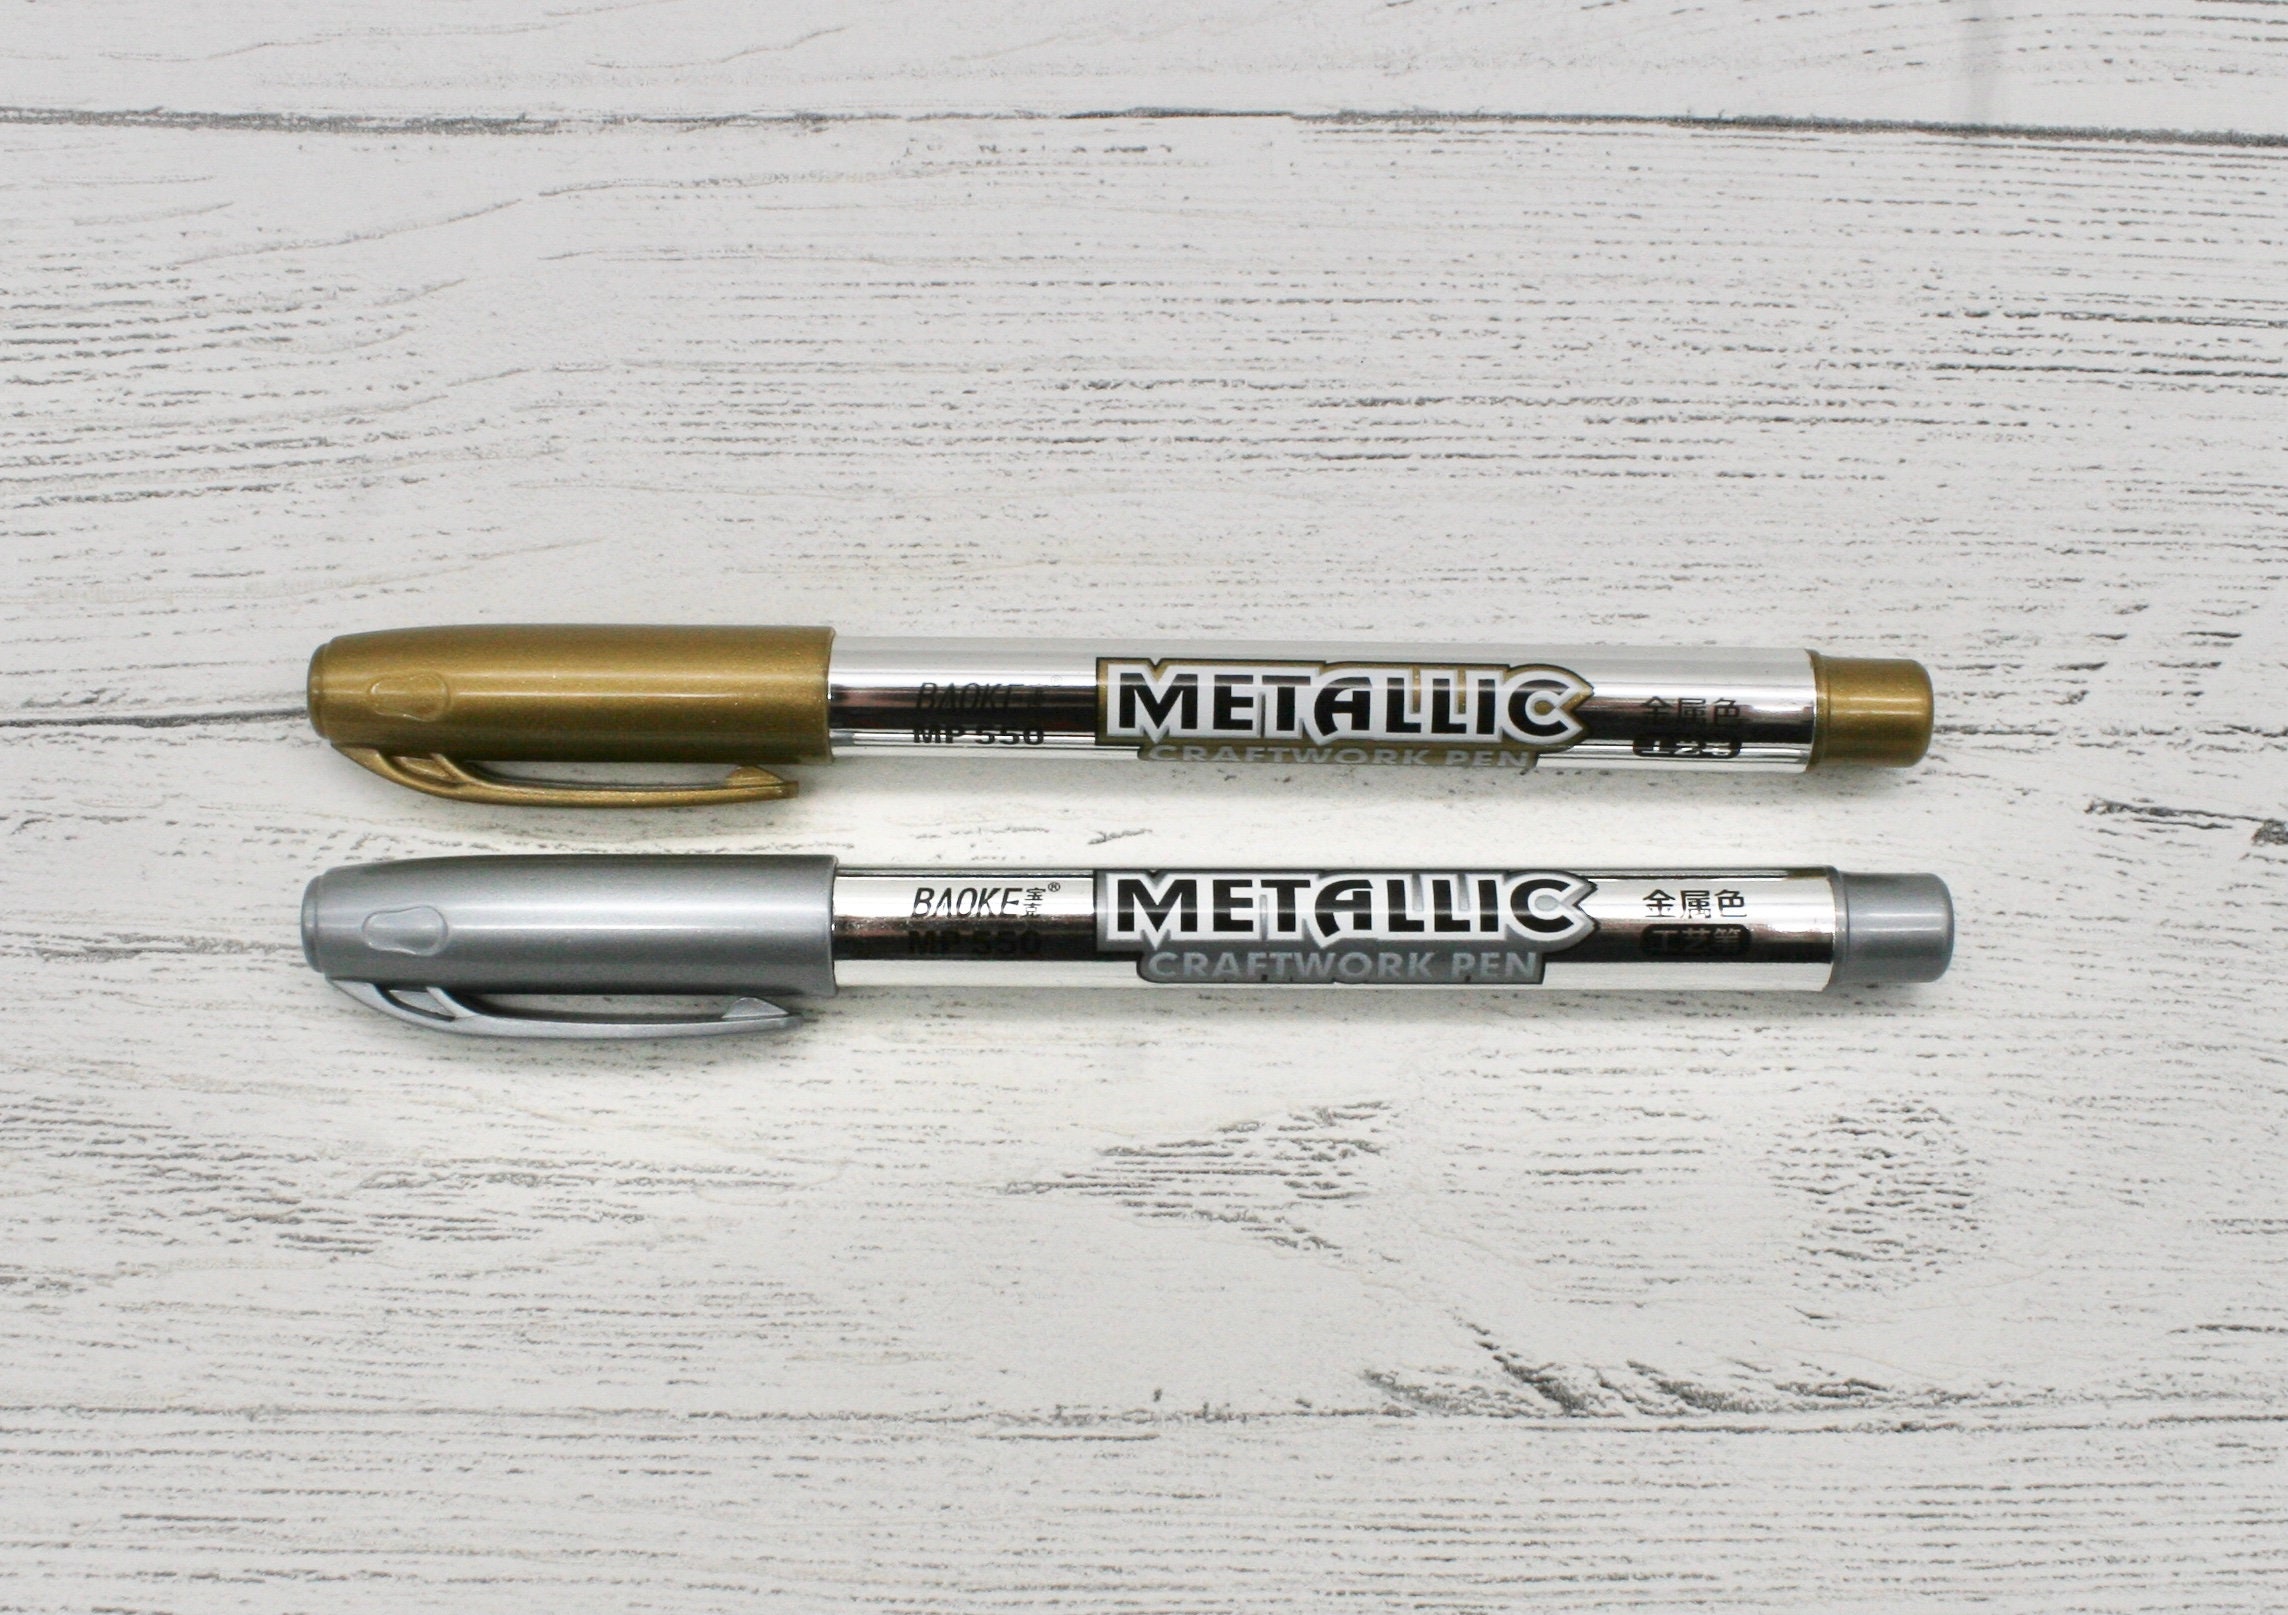 Corianne's Metall Food Markers Pens - Gold, Silver, Bronze, fda